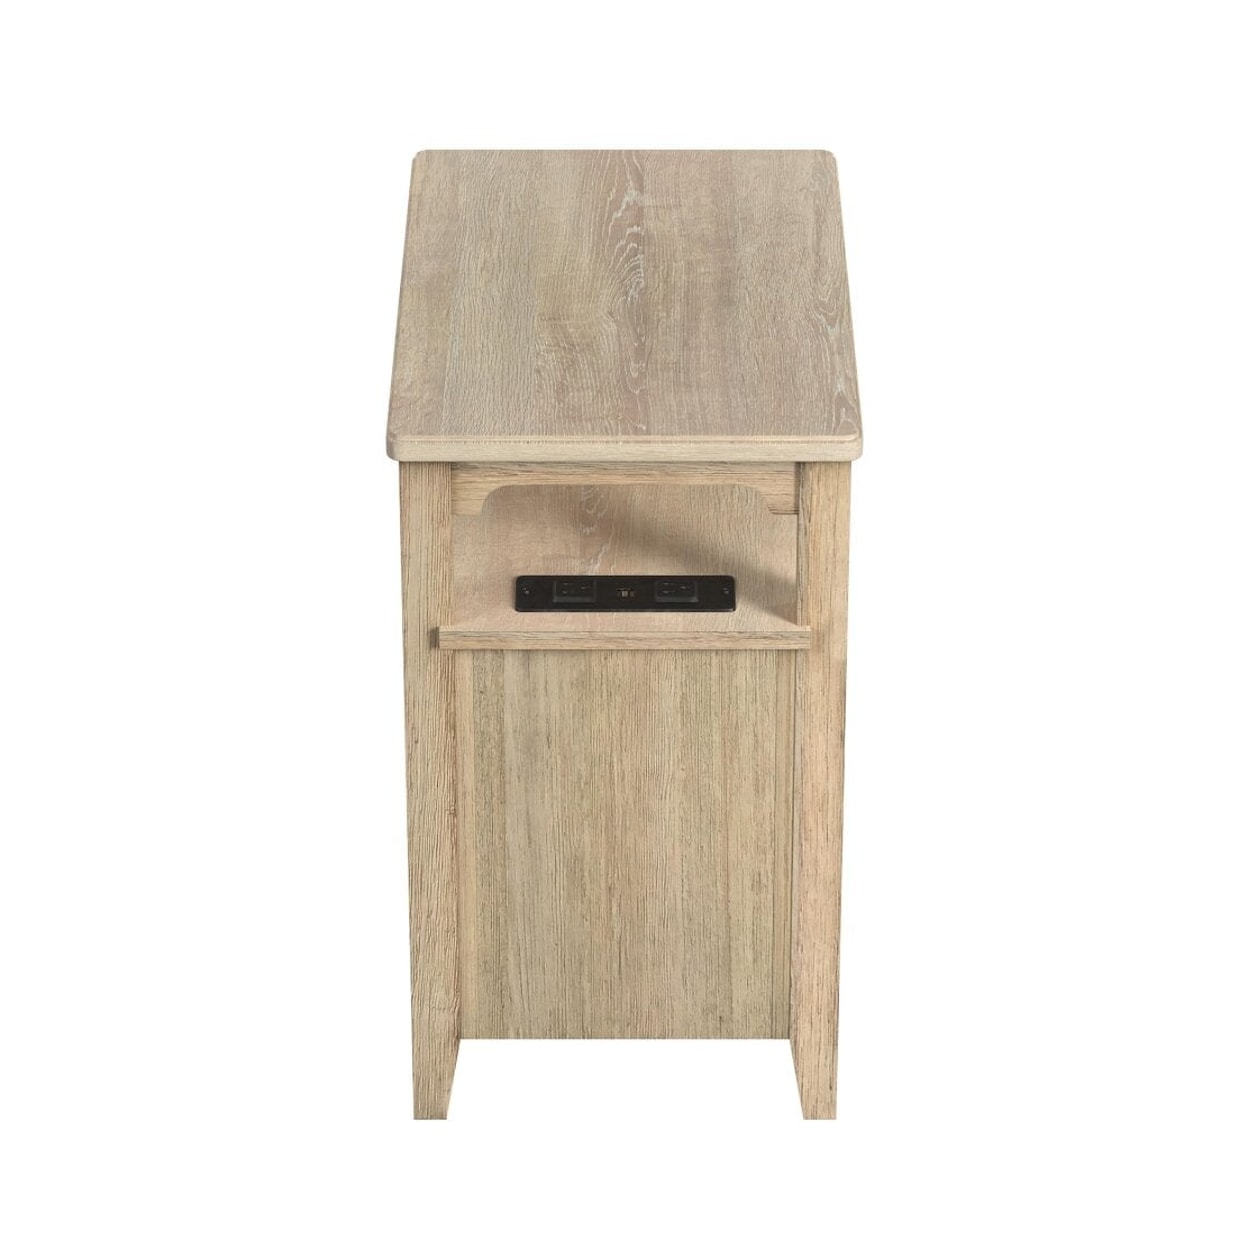 Null Furniture Chatham Chairside Cabinet W/Charging